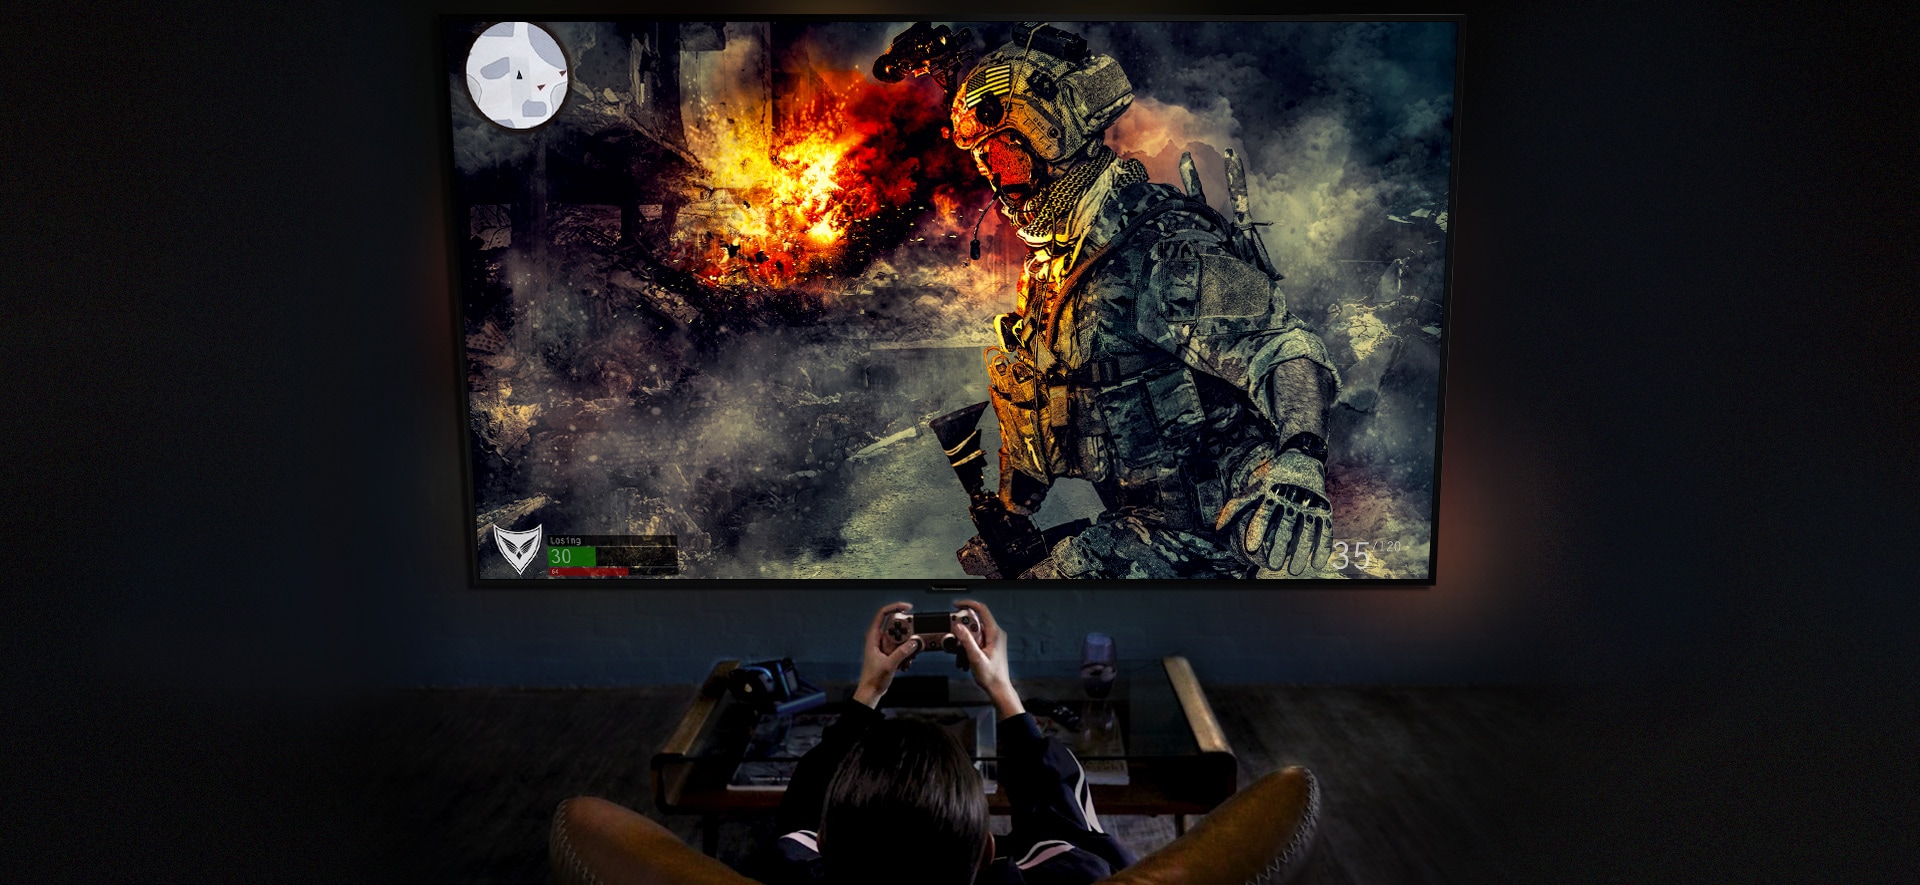 Back shot of a woman playing a war game in front of a large screen TV